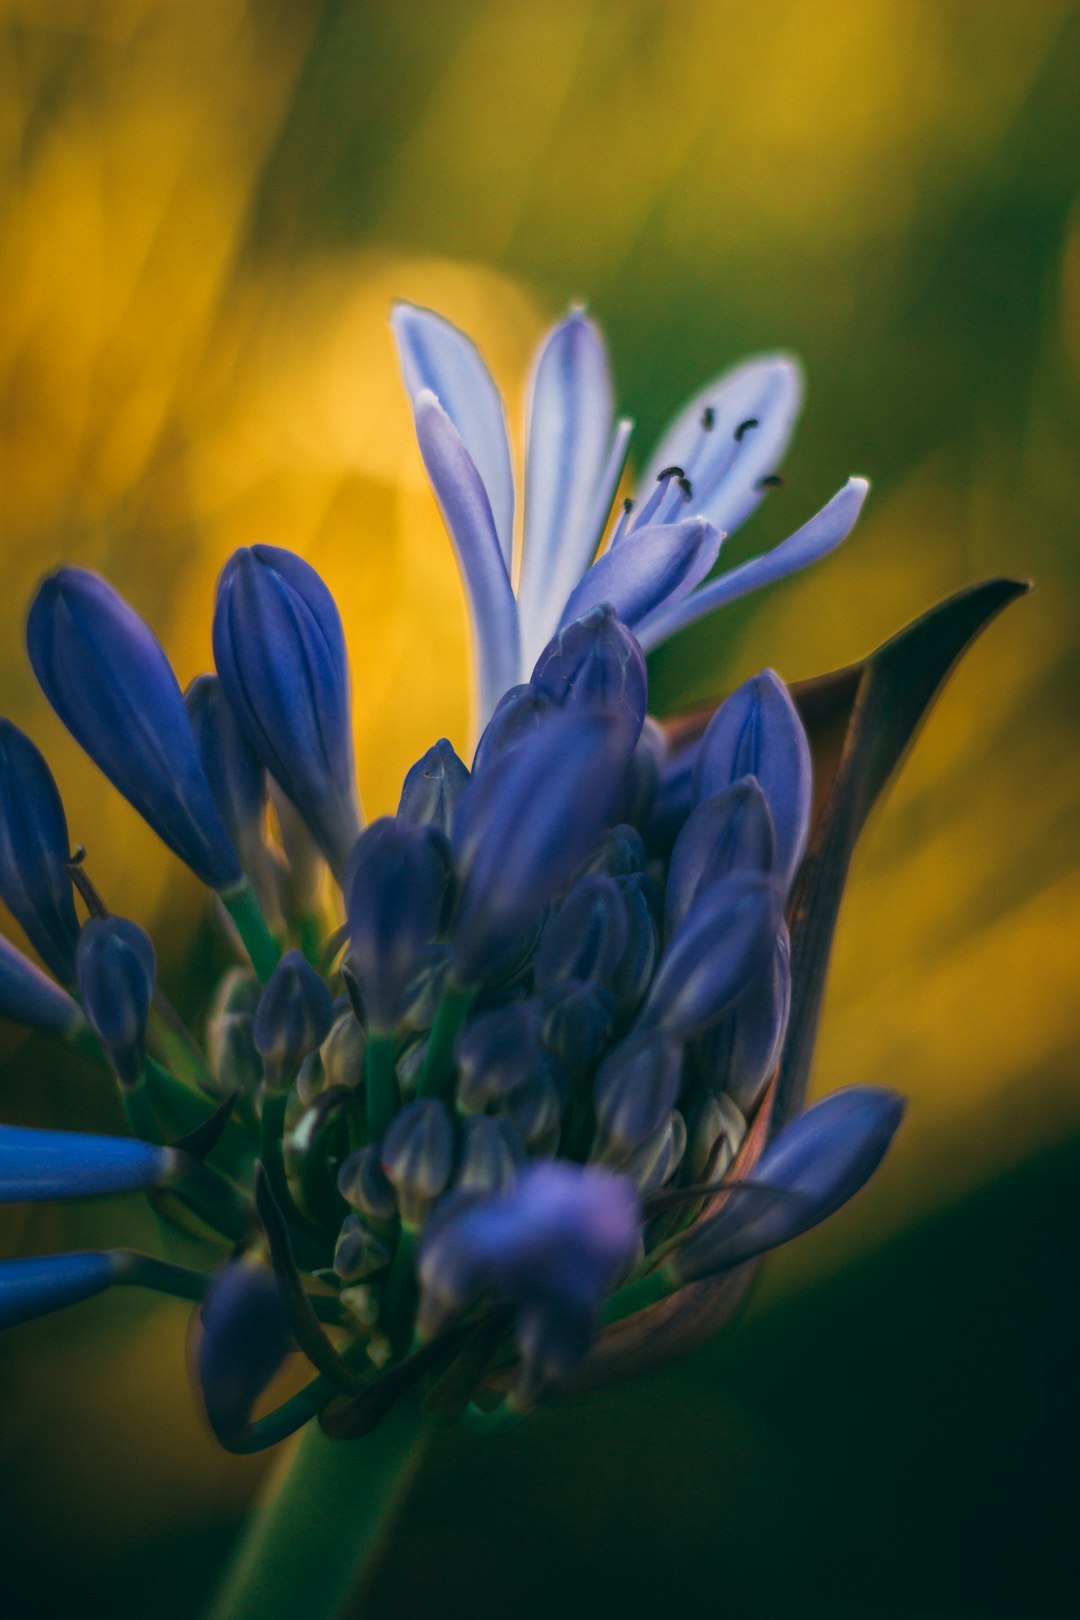 blue and white flower in macro shot